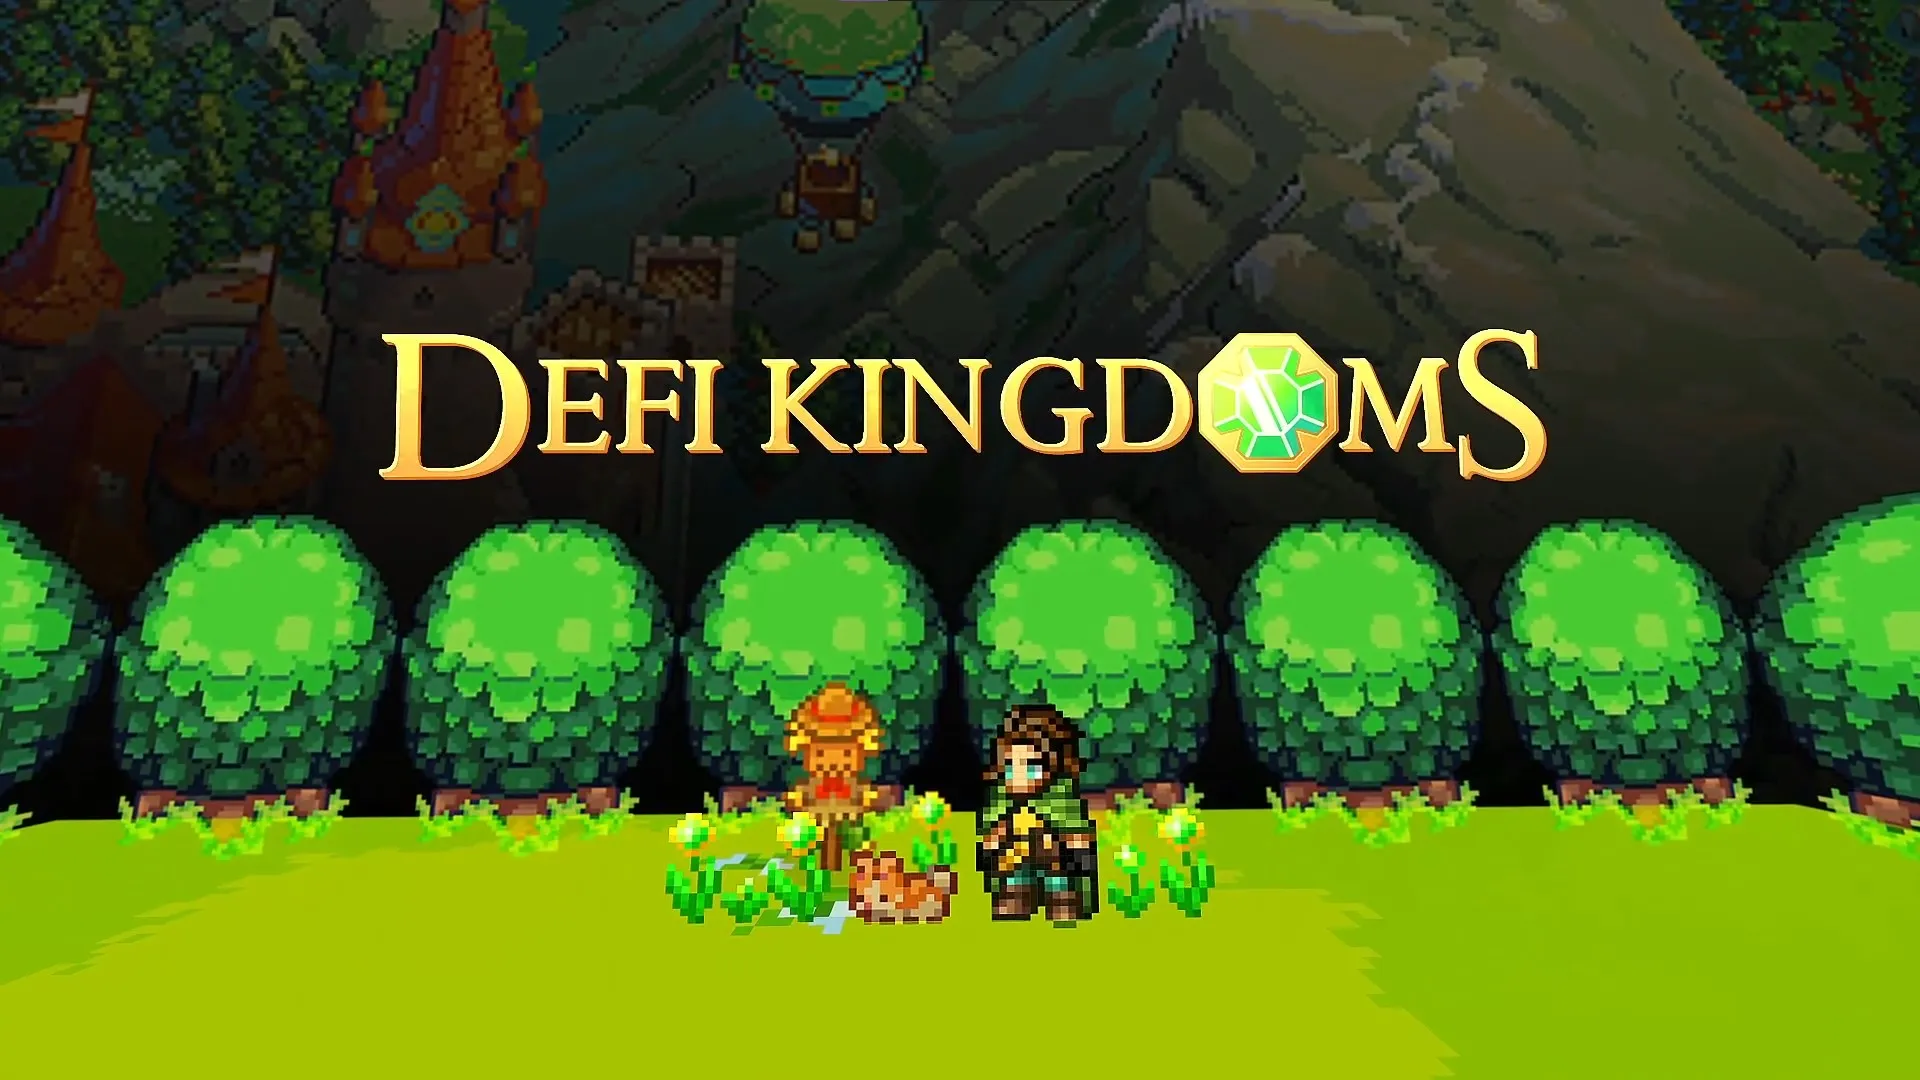 Game cover of Defi Kingdoms. DeFi Kingdoms is a Medieval Fantasy Pixel MMORPG browser game that allows players to step into the world of decentralized finance.